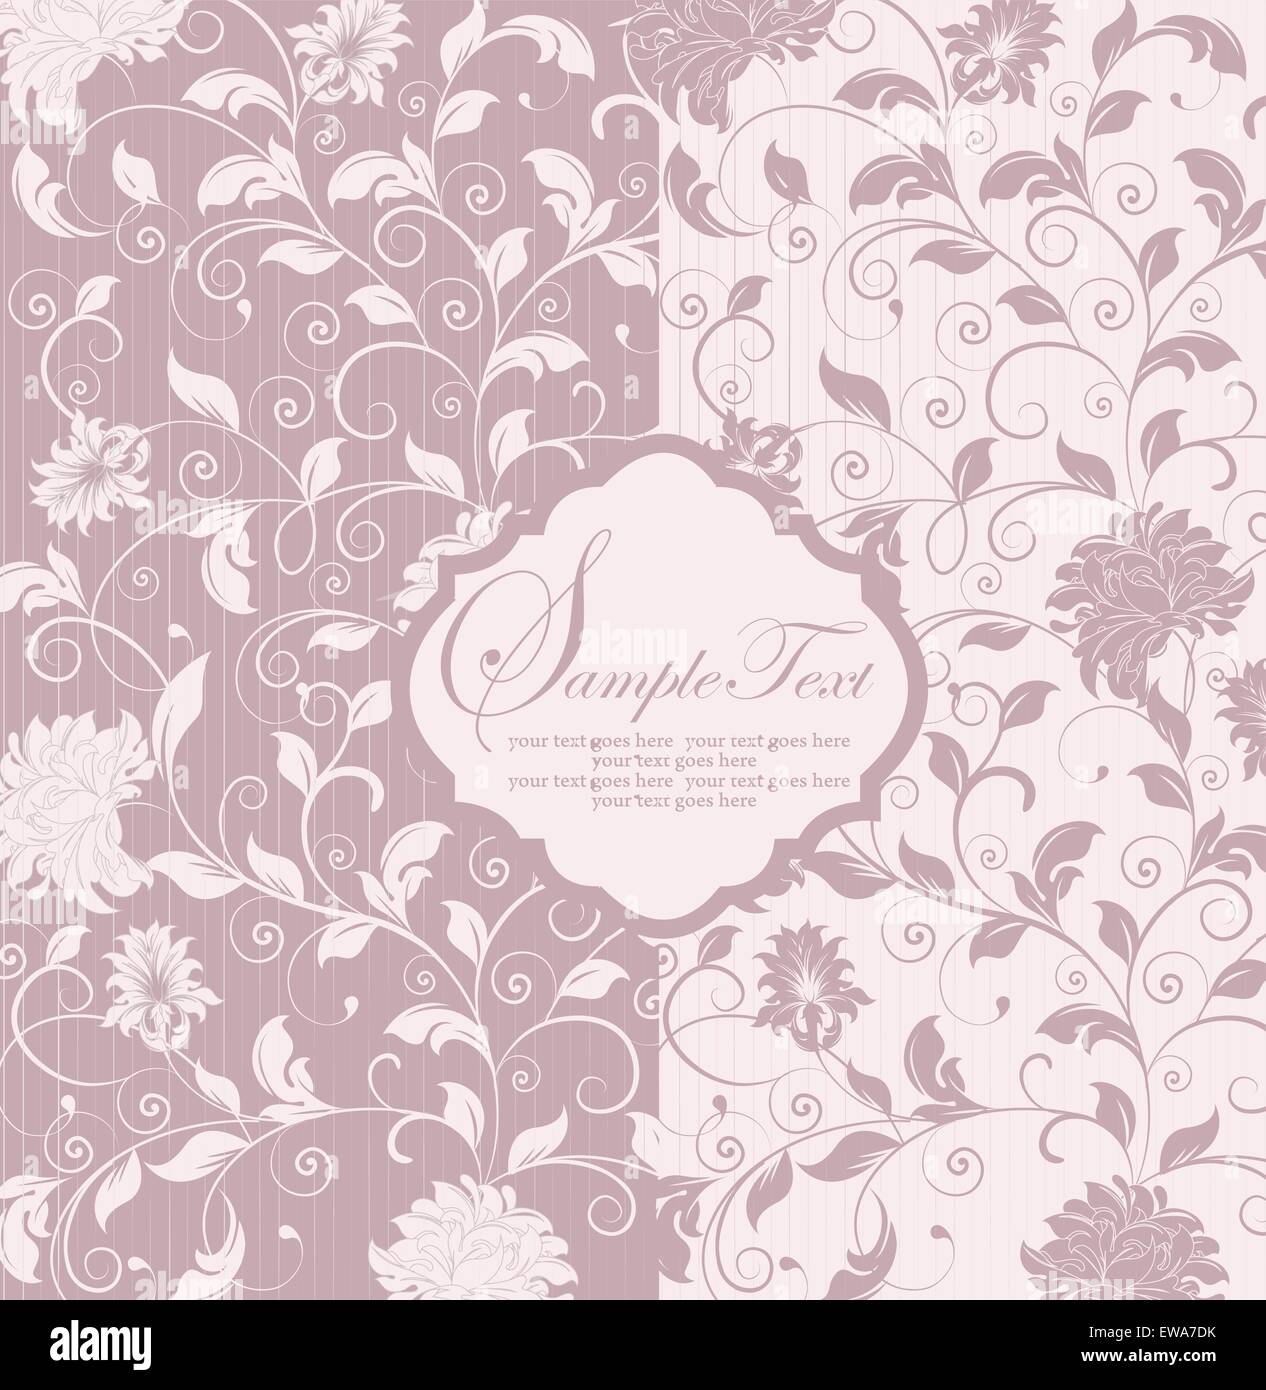 Vintage invitation card with ornate elegant retro abstract floral design, pale pastel purple and white flowers and leaves Stock Vector